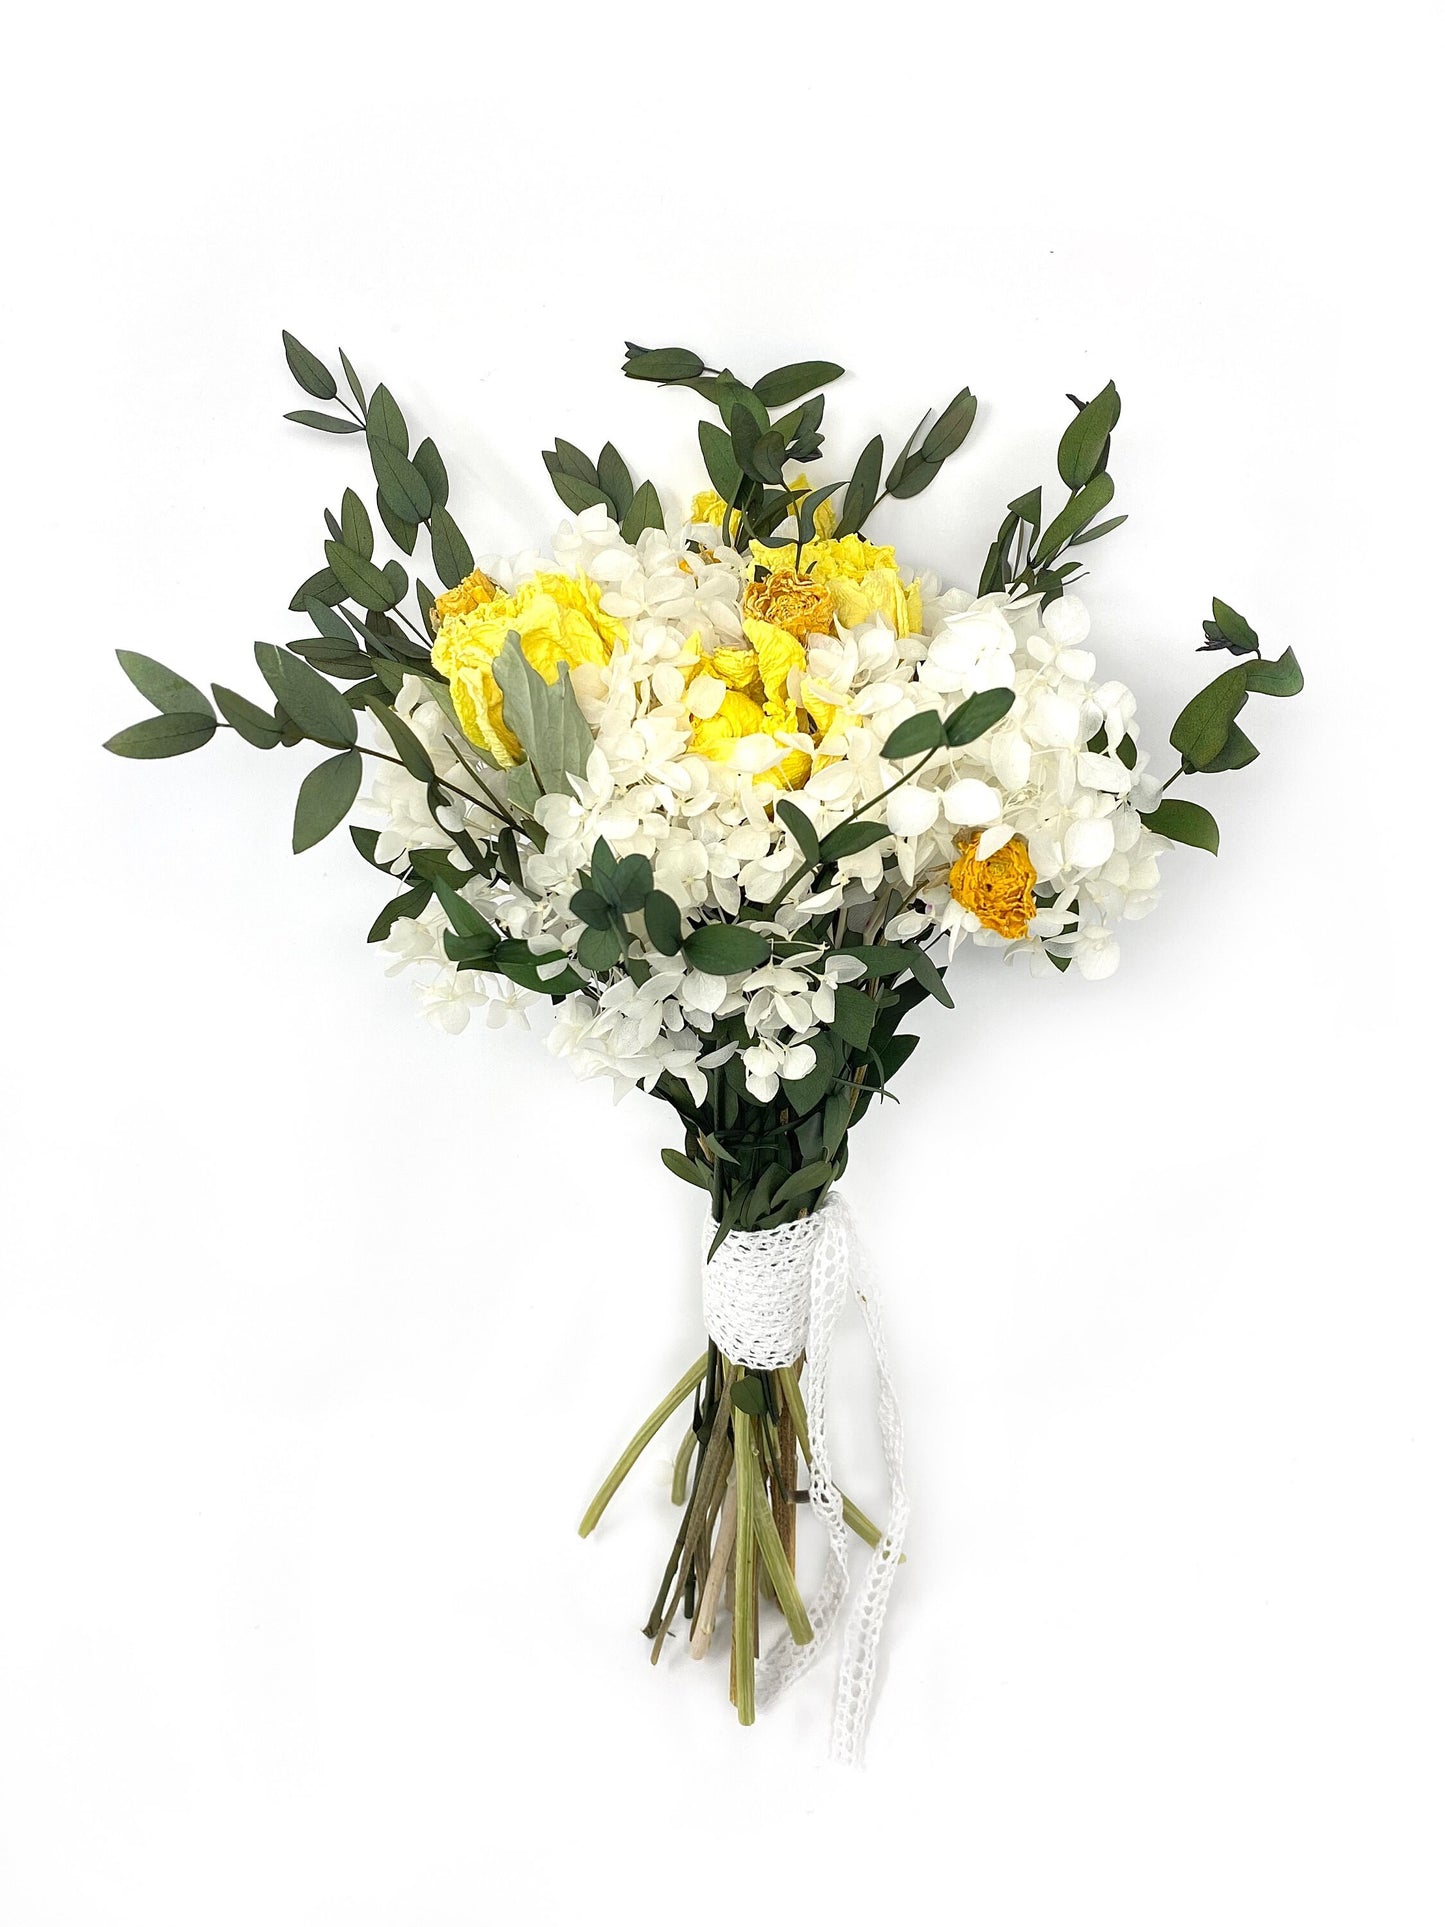 Yellow Bouquet, Wedding Flowers, Dried Florals, Yellow and White, Throw Bouquet, Peonies, Greenery, Summer Florals, Hydrangeas, Bridal